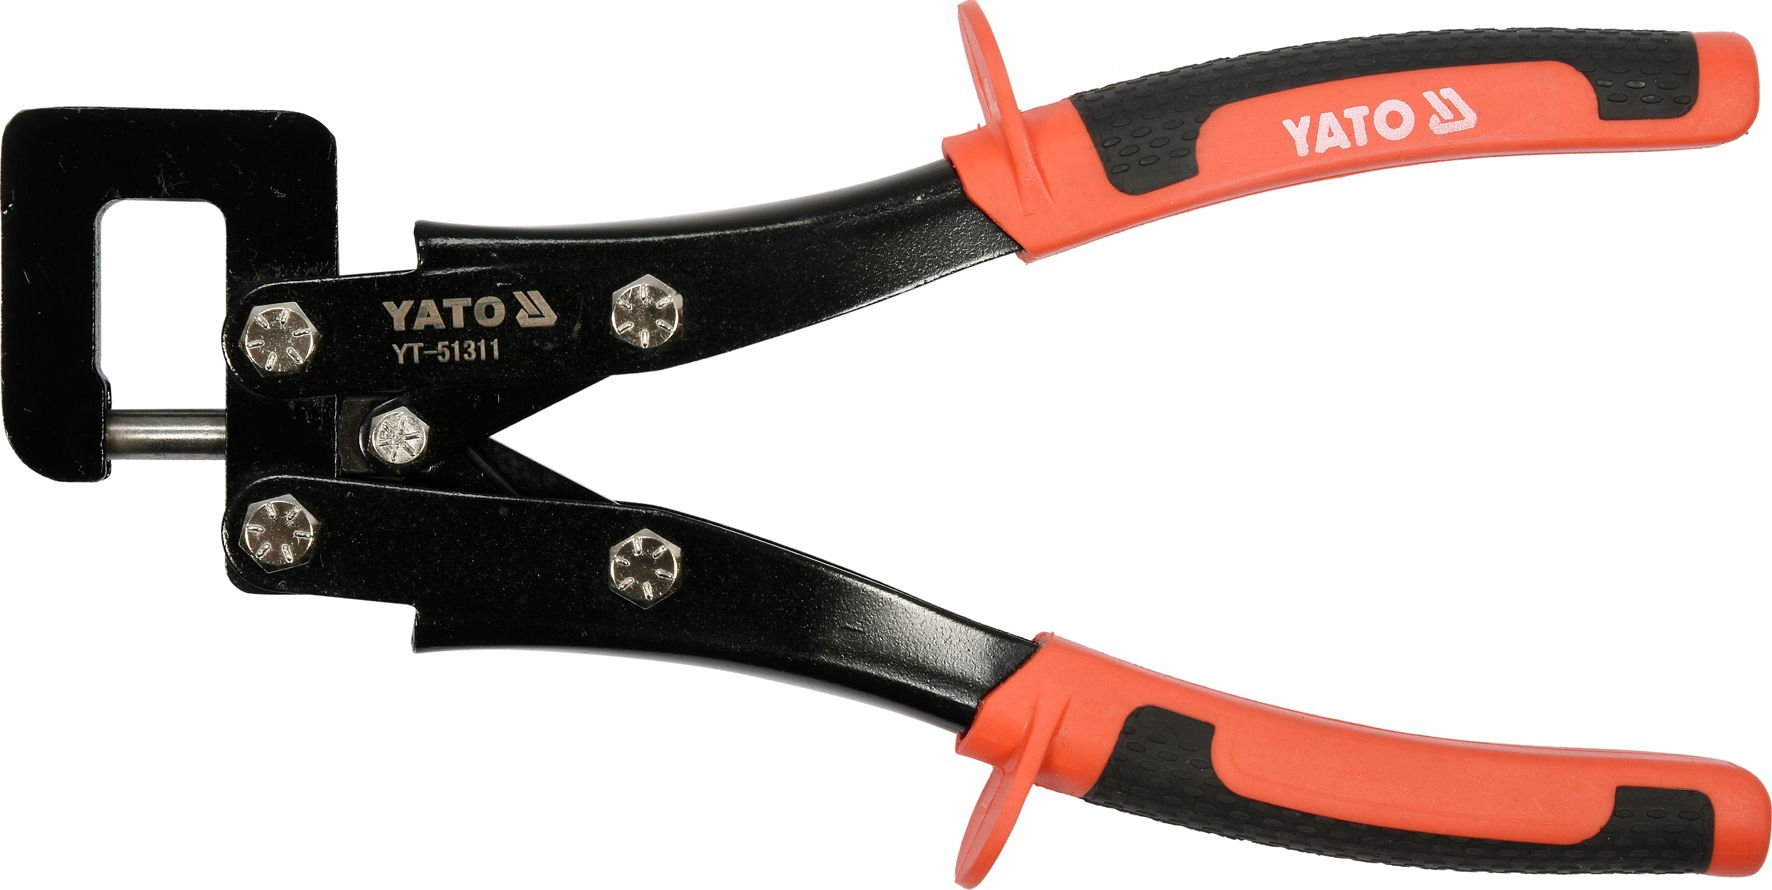 Yato Pliers for joining profiles 280mm (YT-51311)